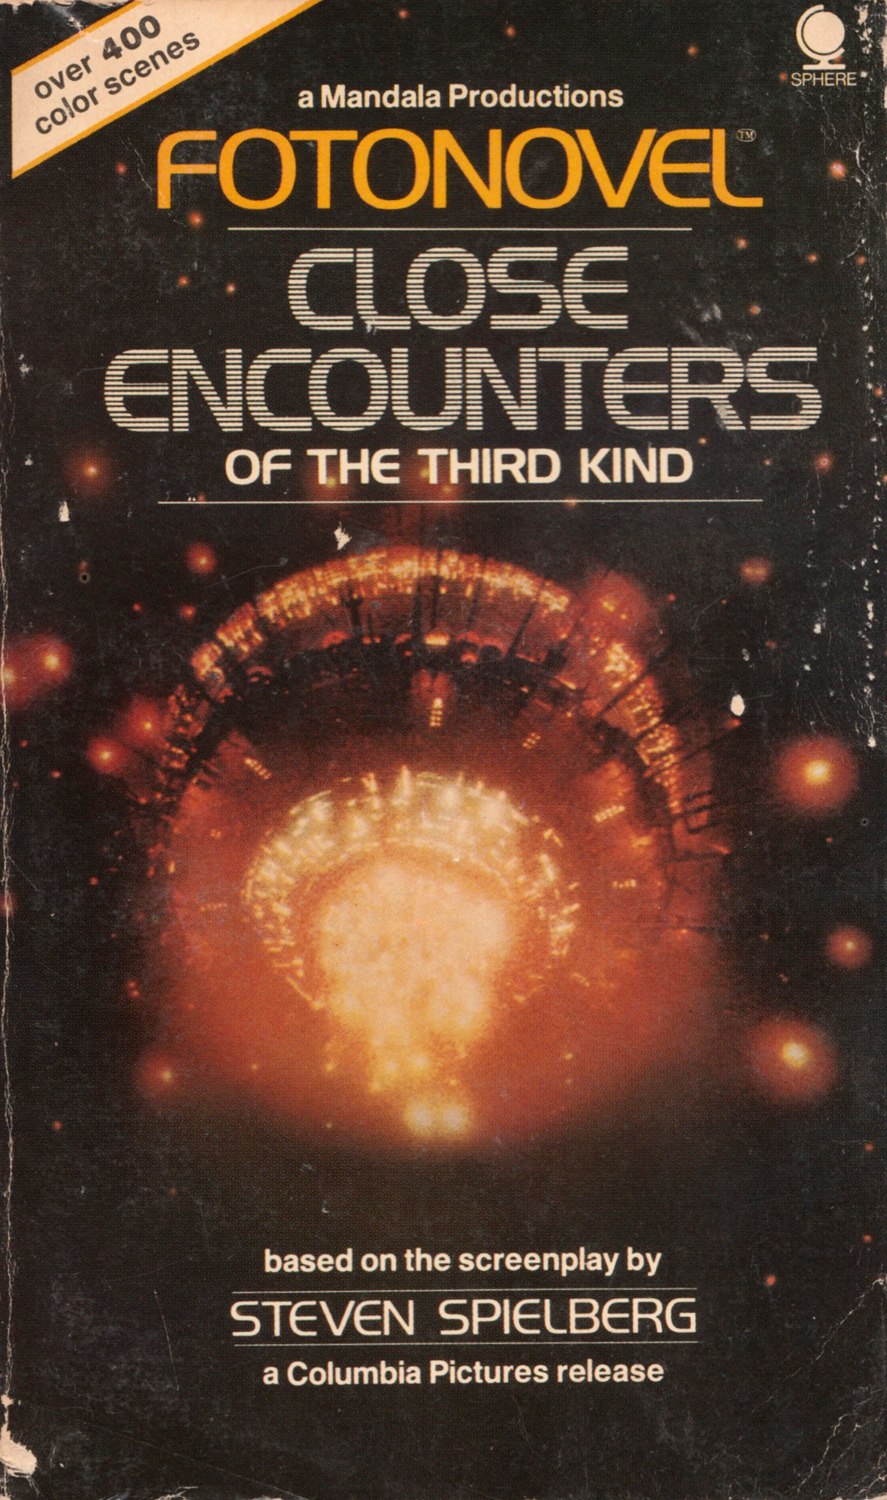 Fotonovel: Close Encounters of the Third Kind, based on the screenplay by Steven